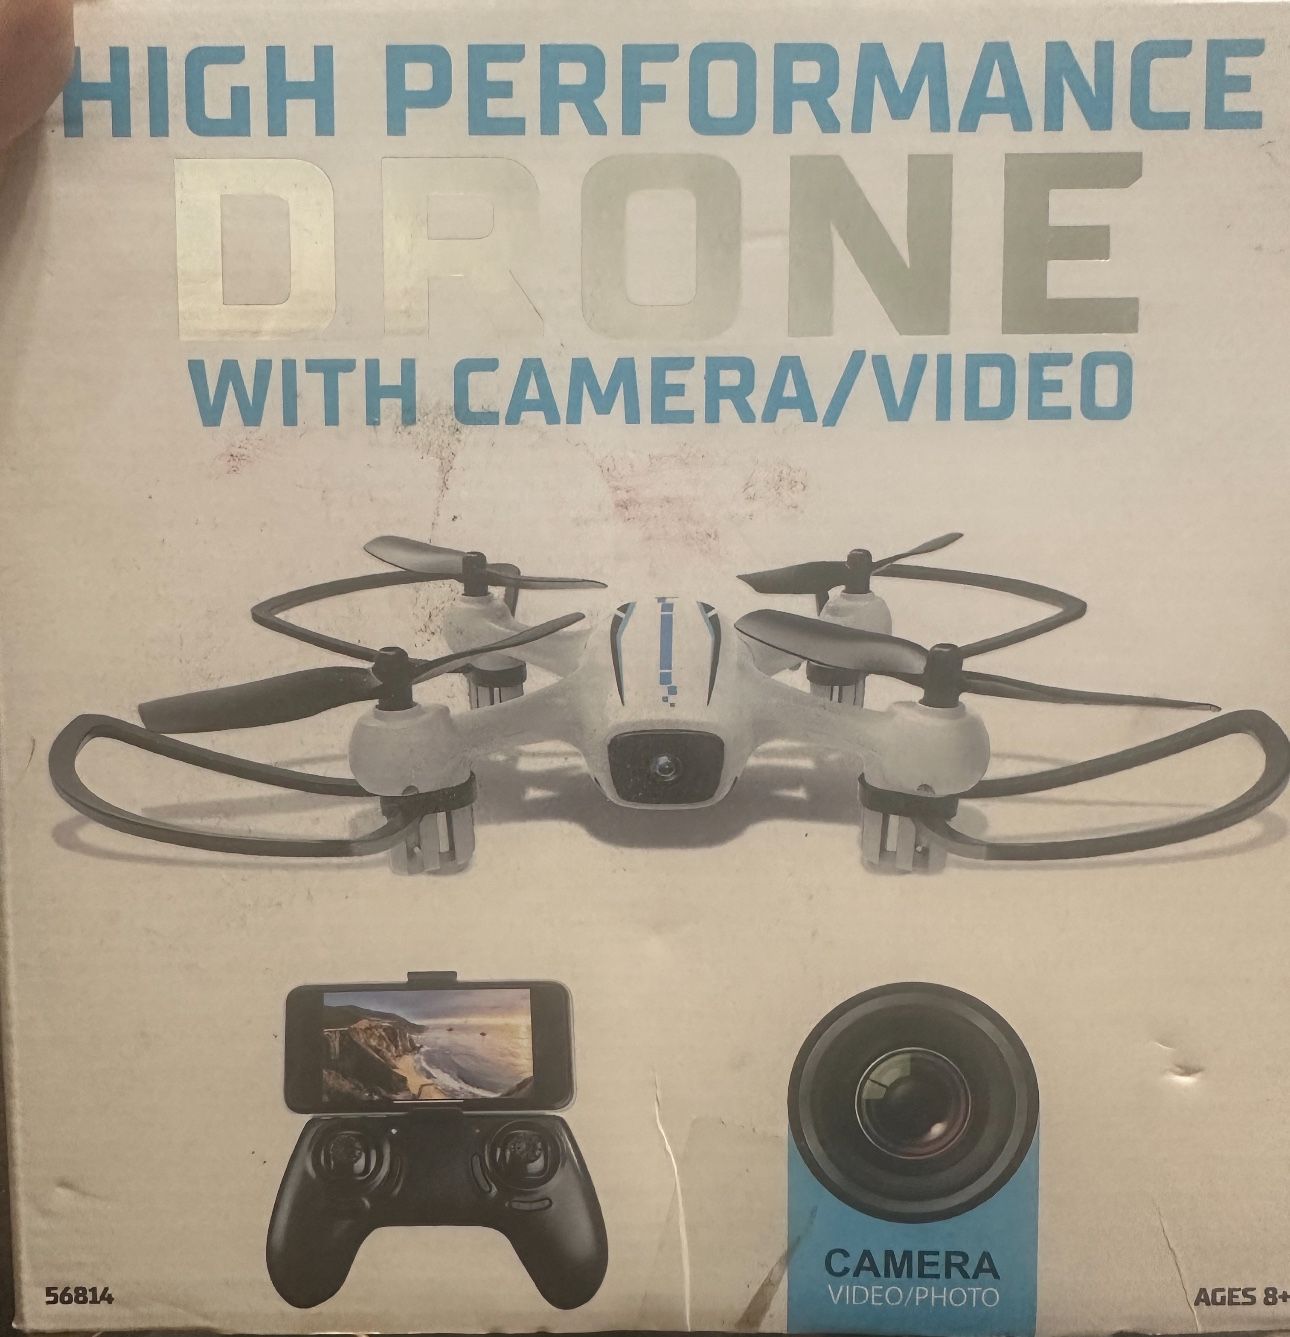 High Performance Drone With Camera/Video